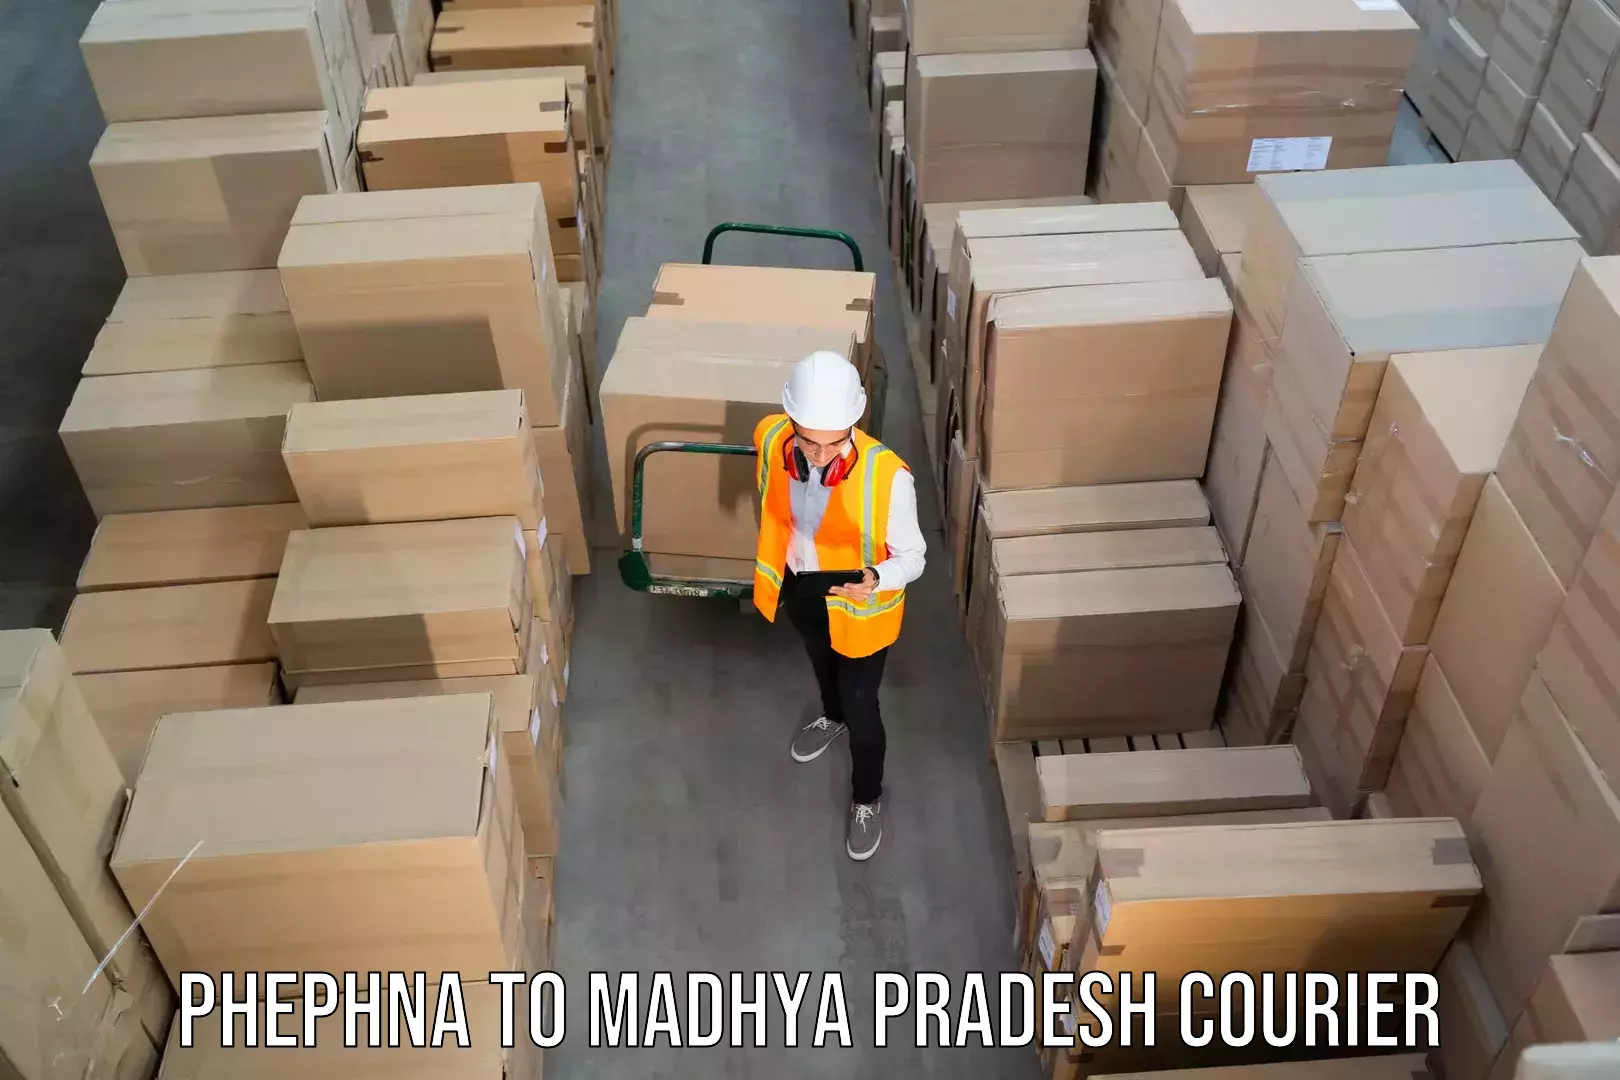 Express package delivery Phephna to Madhya Pradesh